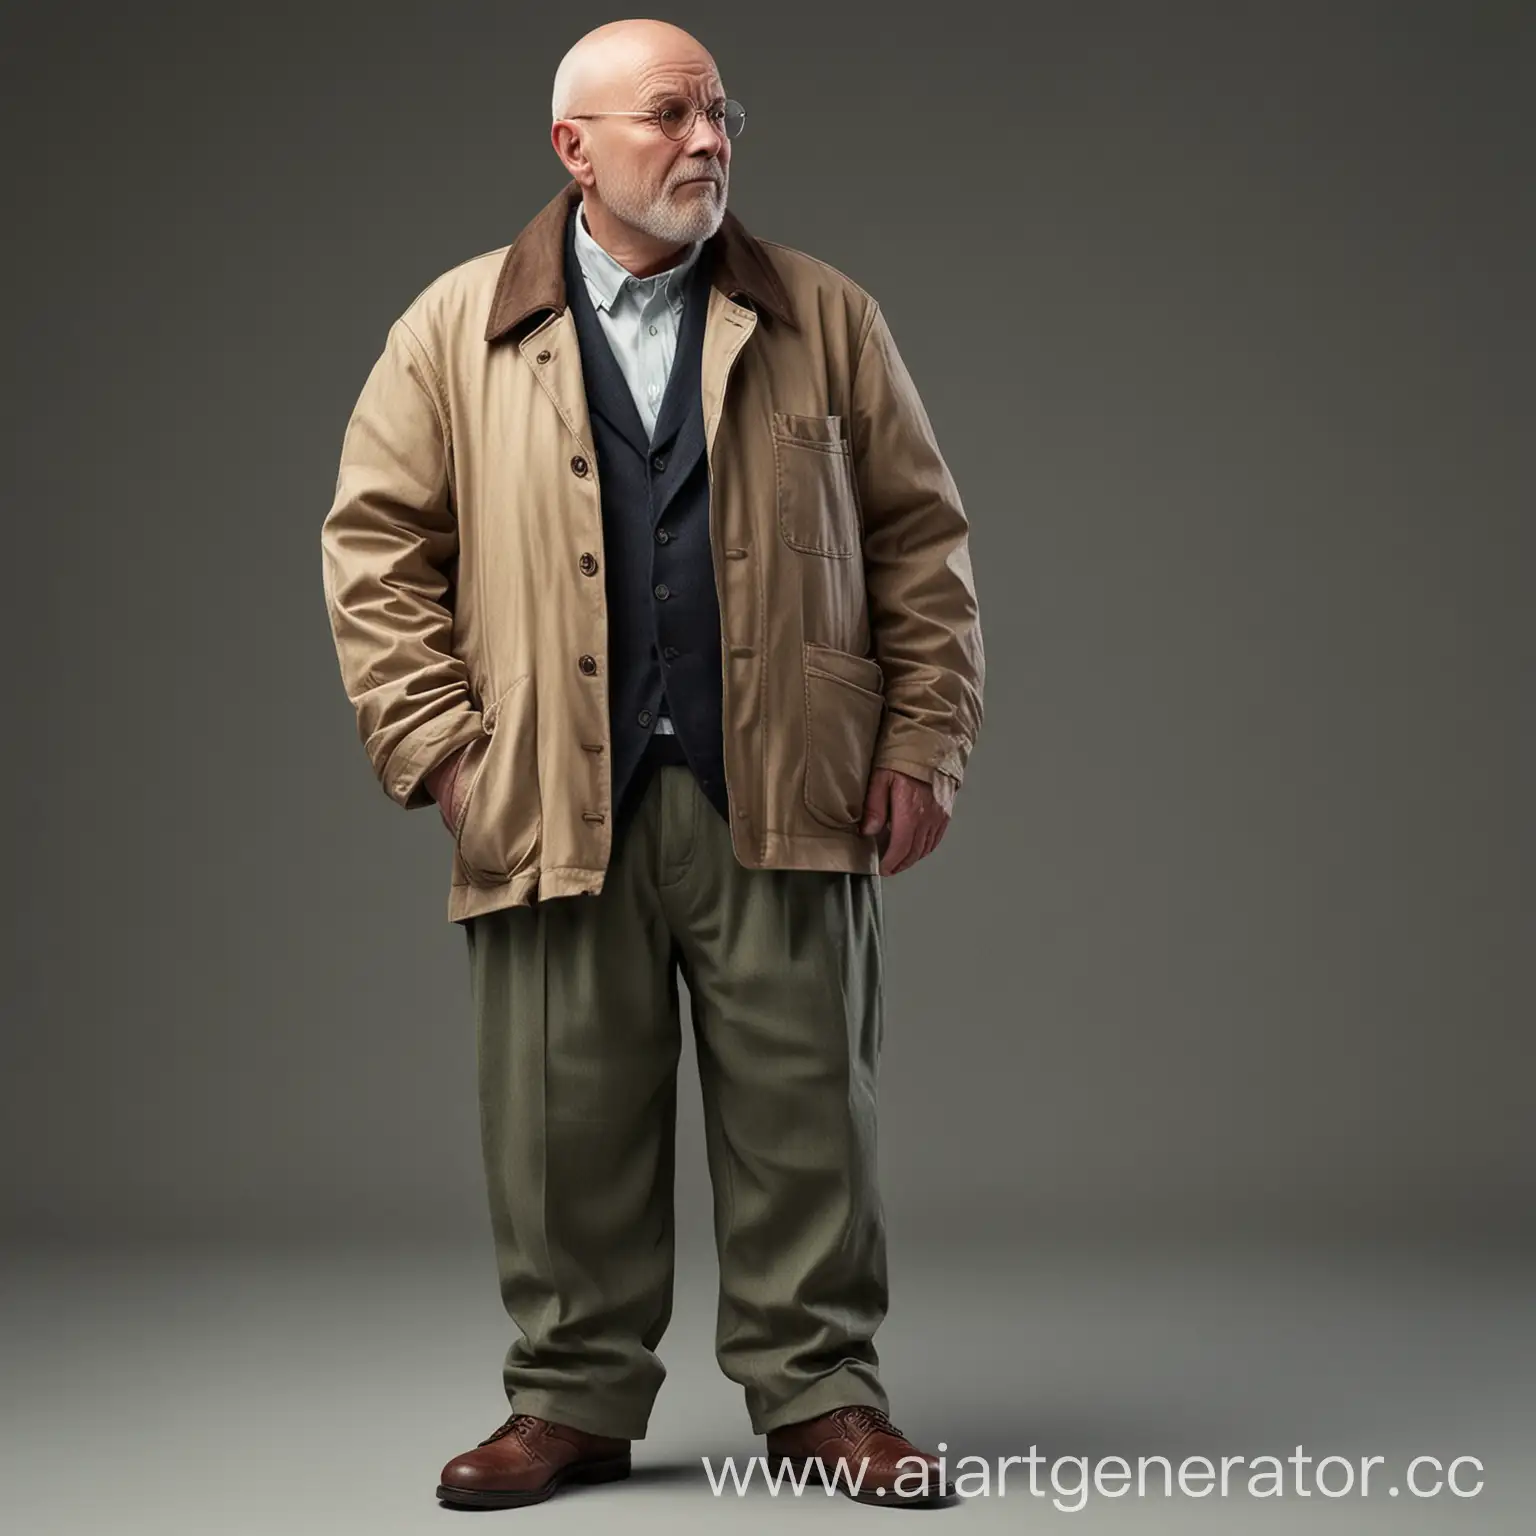 Elderly-Bald-Man-in-1950s-Style-Jacket-and-Trousers